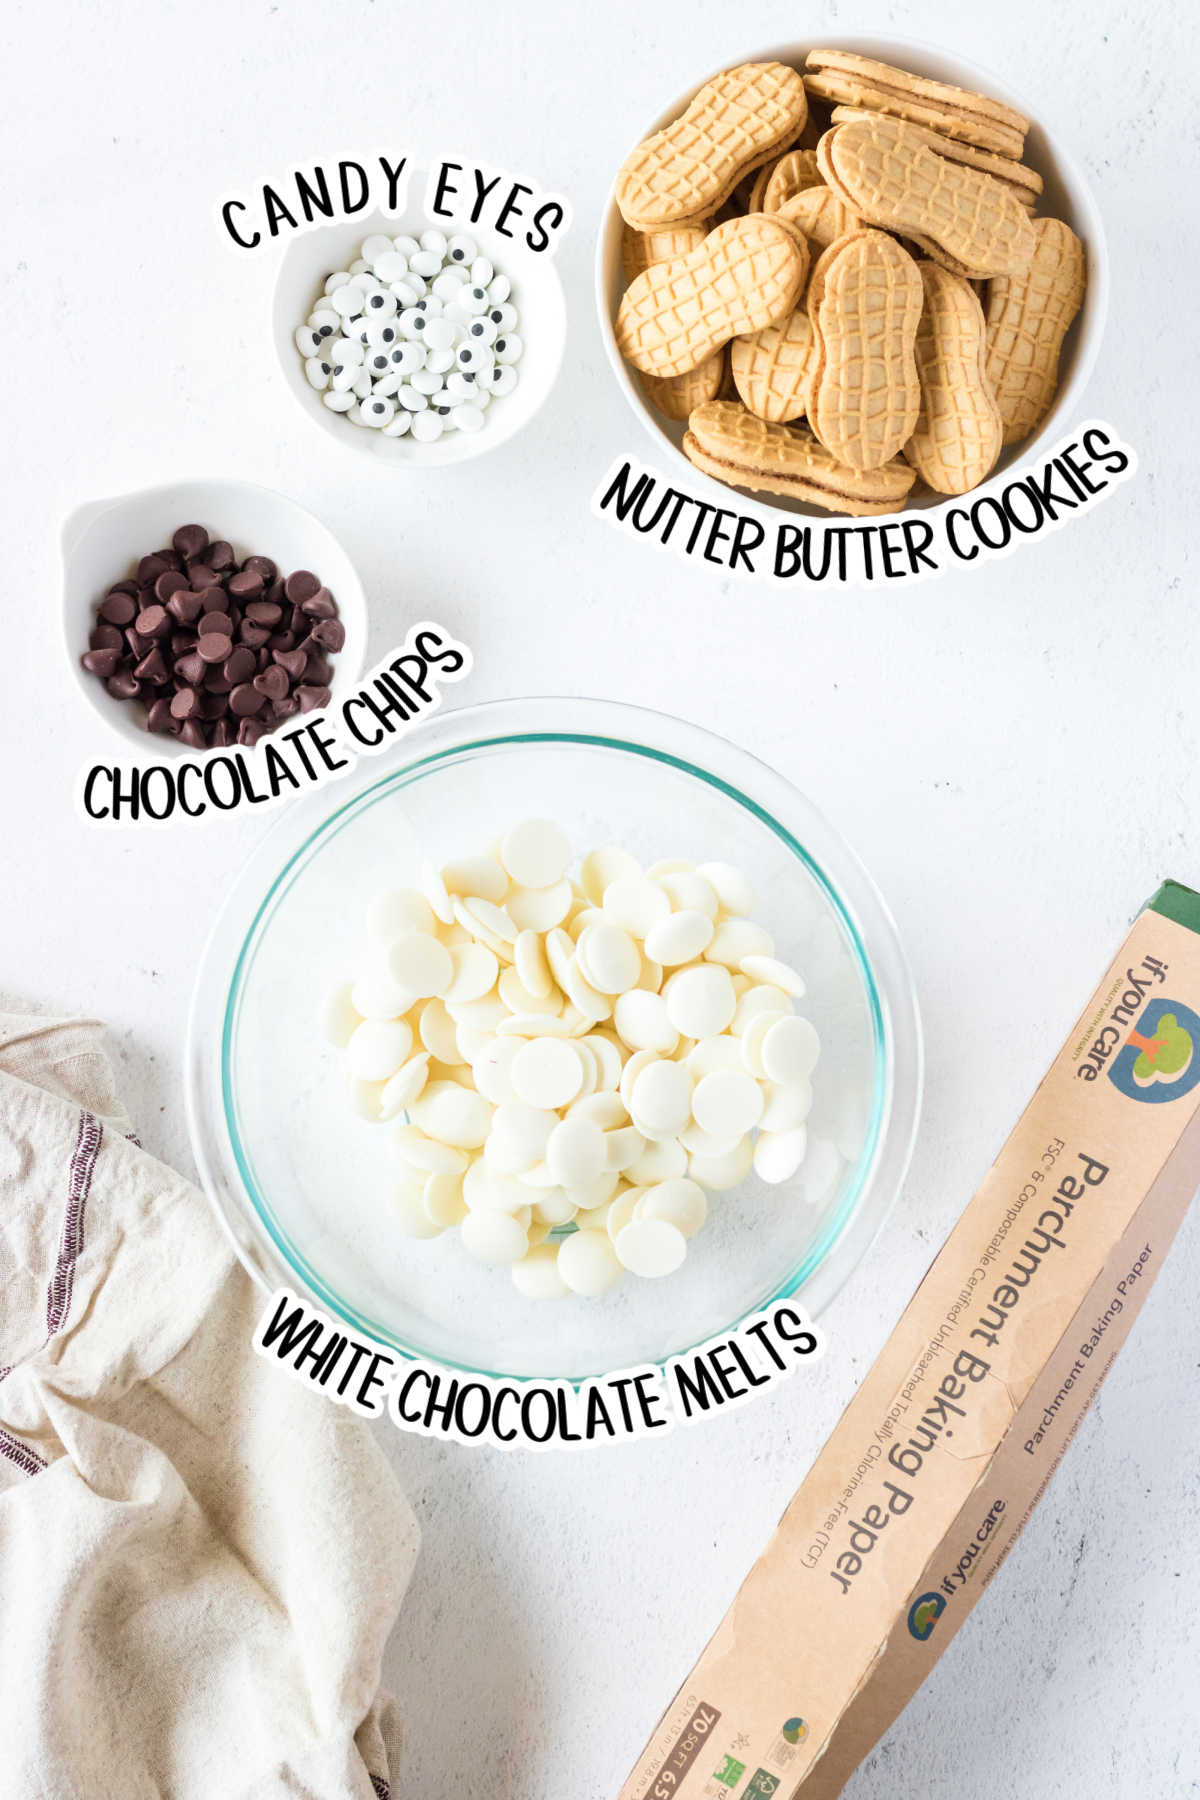 Labeled ingredients for Nutter Butter ghost cookies.